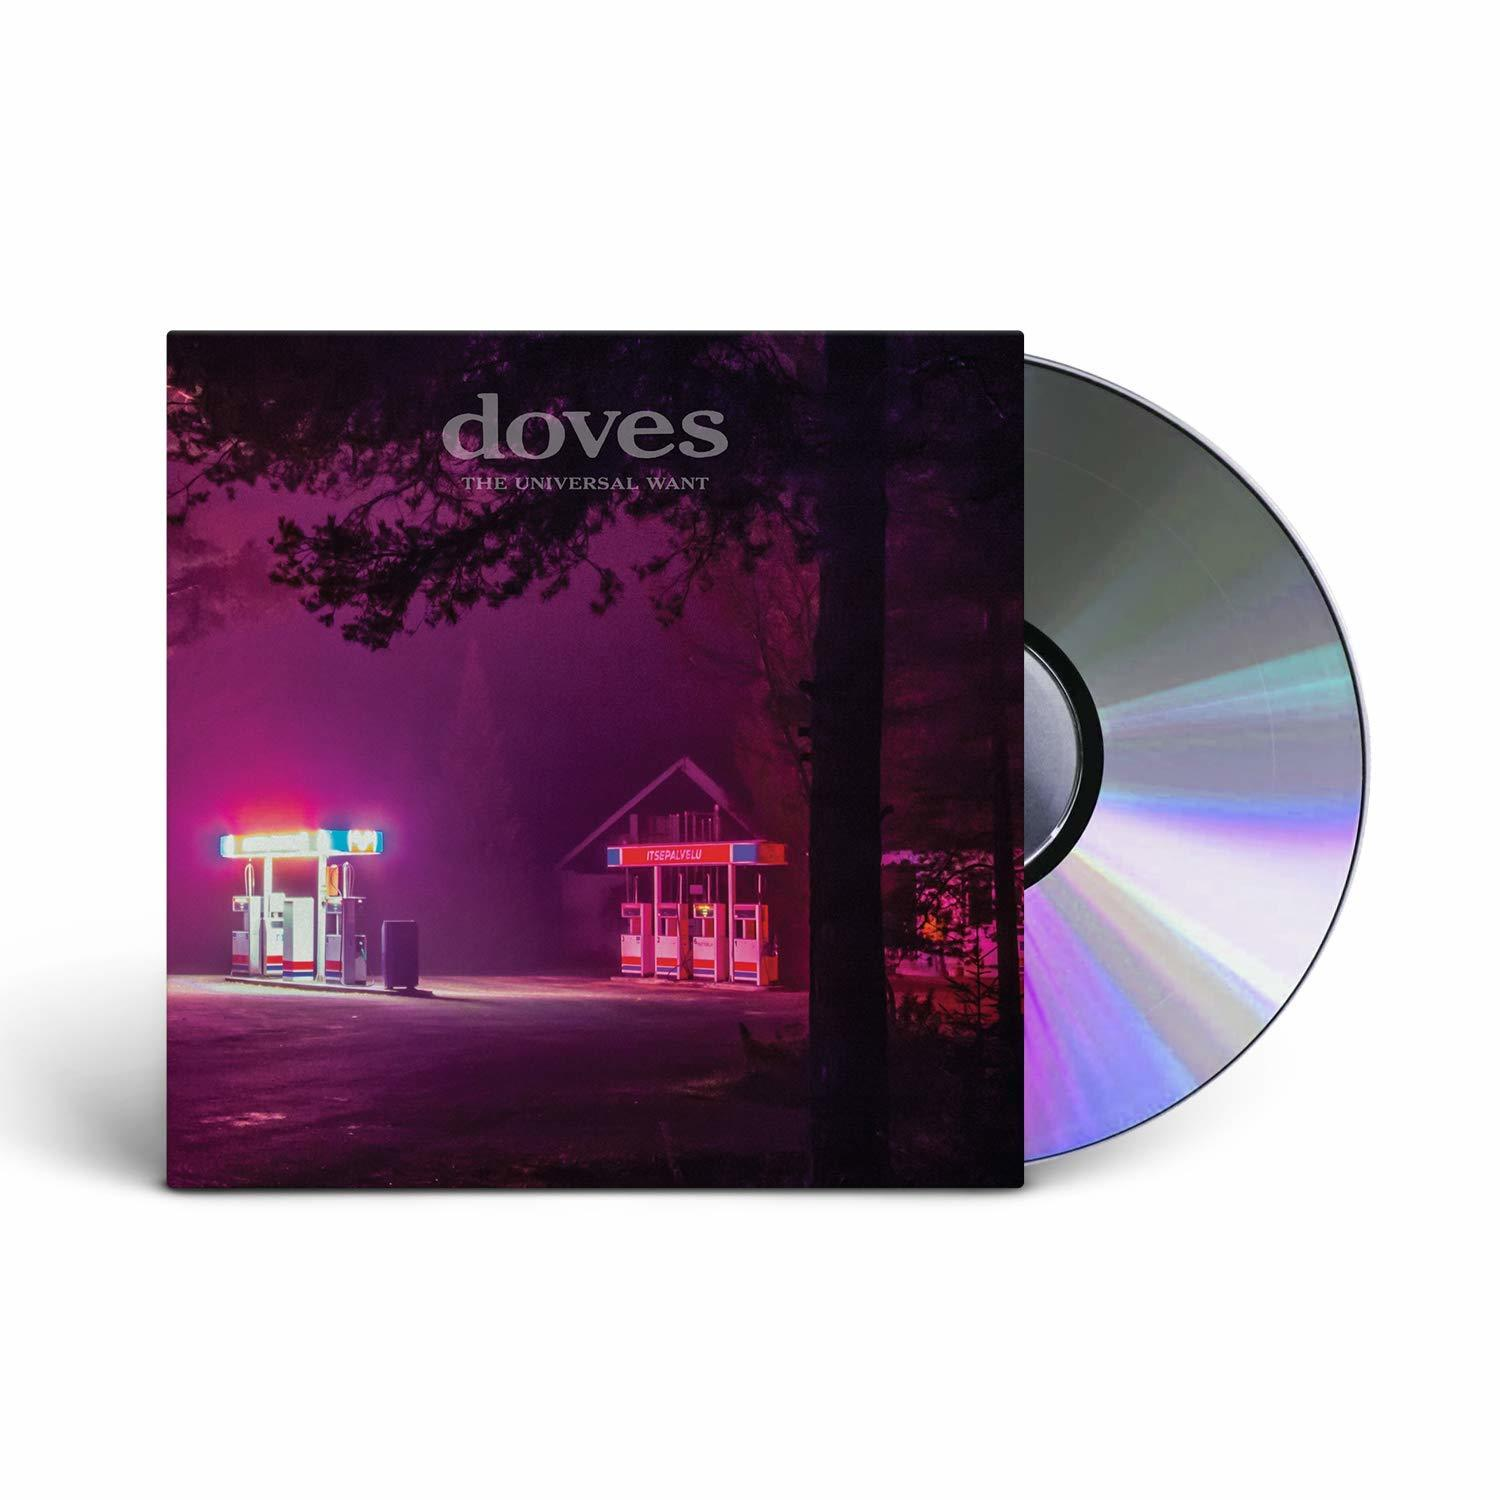 - Doves Want (CD) Universal - The